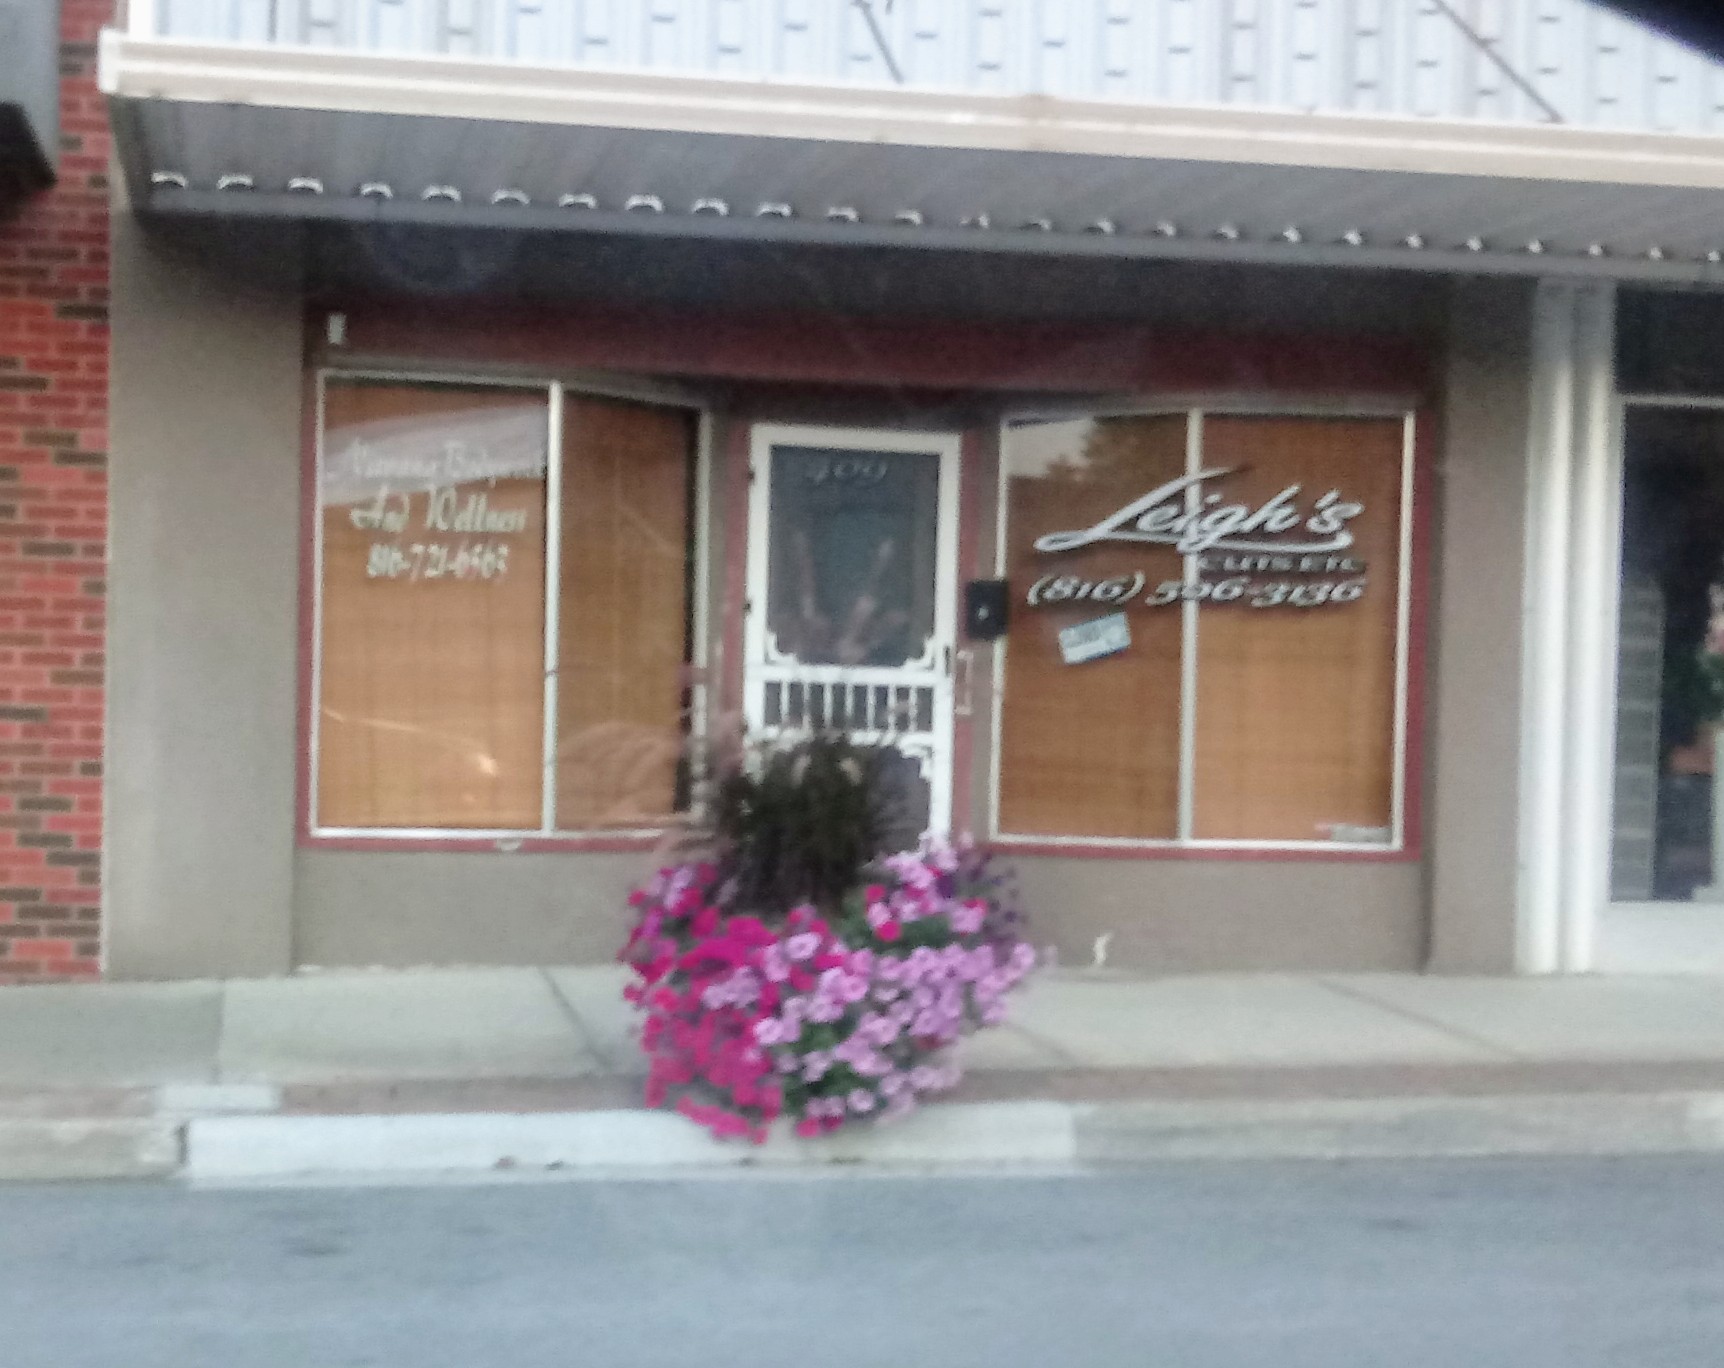 Leigh's Cuts, Etc. 409 S Thompson Ave, Excelsior Springs Missouri 64024